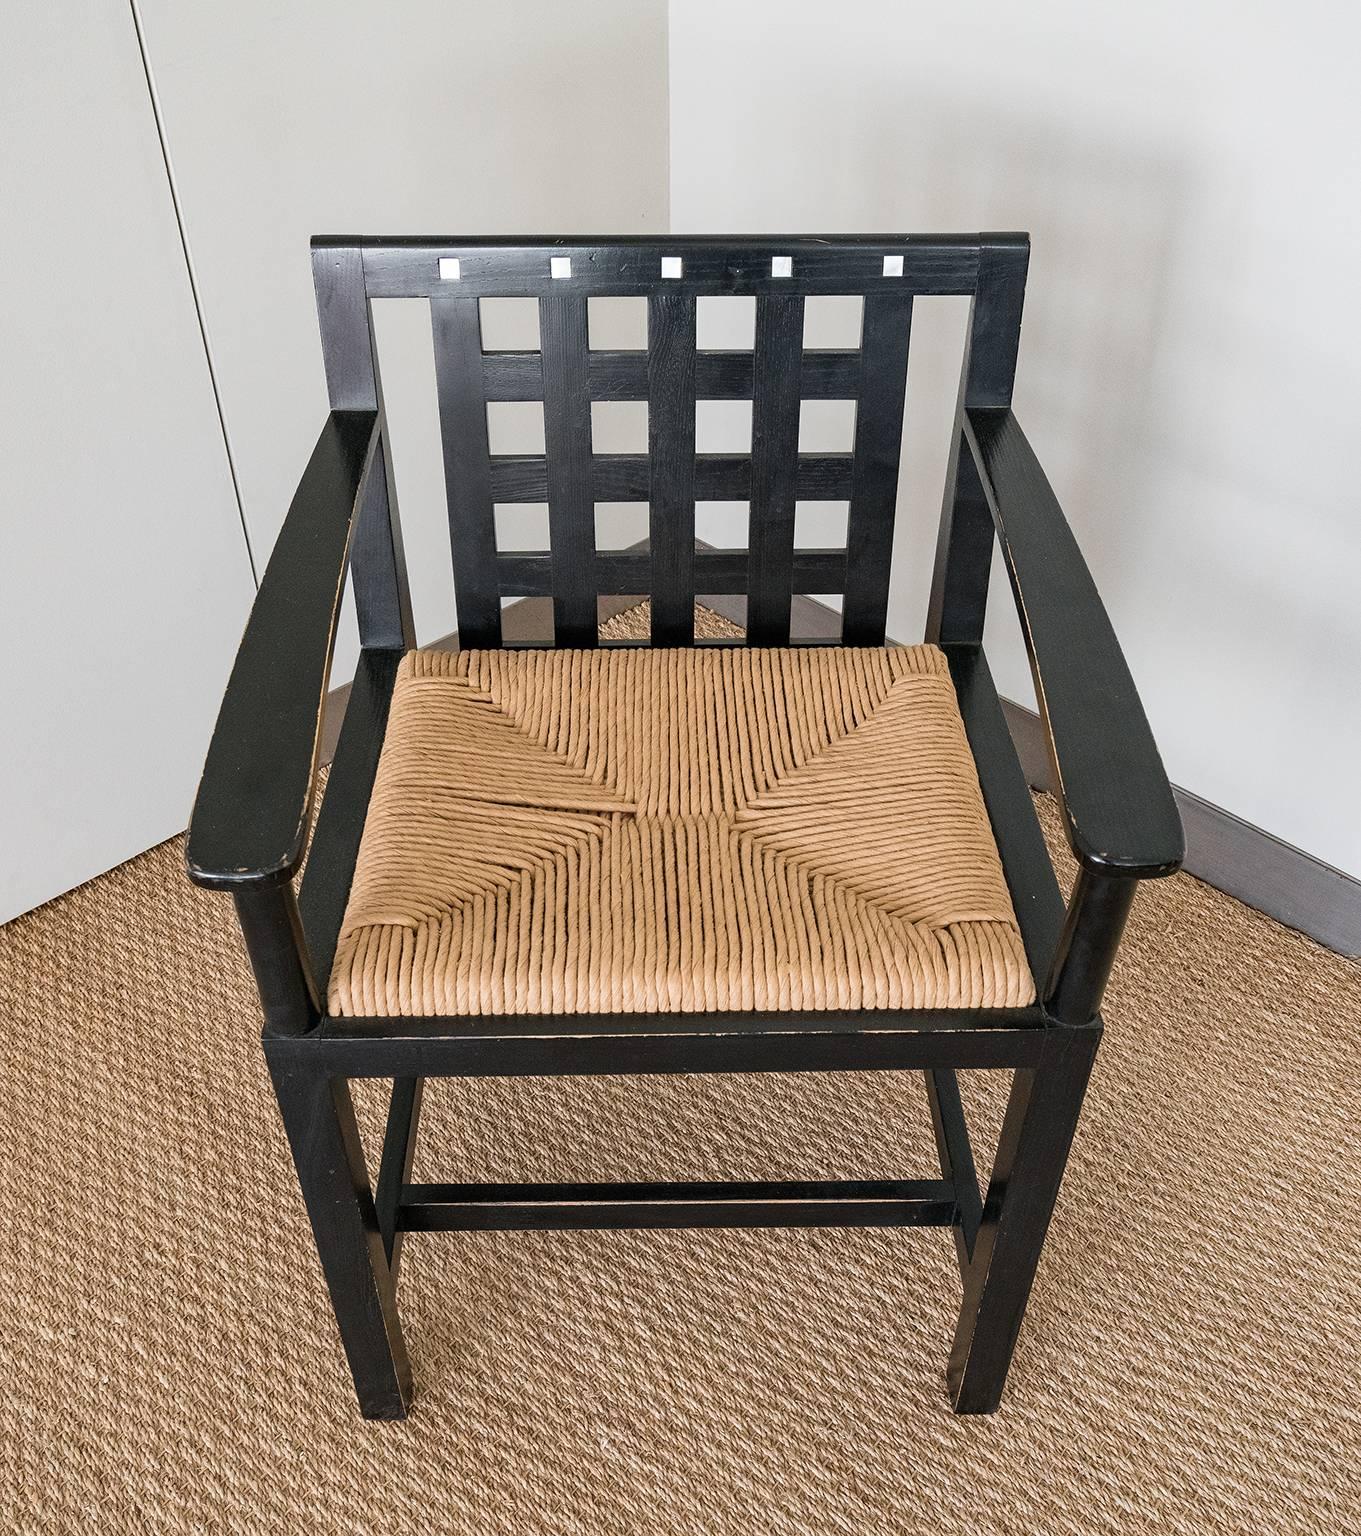 mackintosh chairs for sale